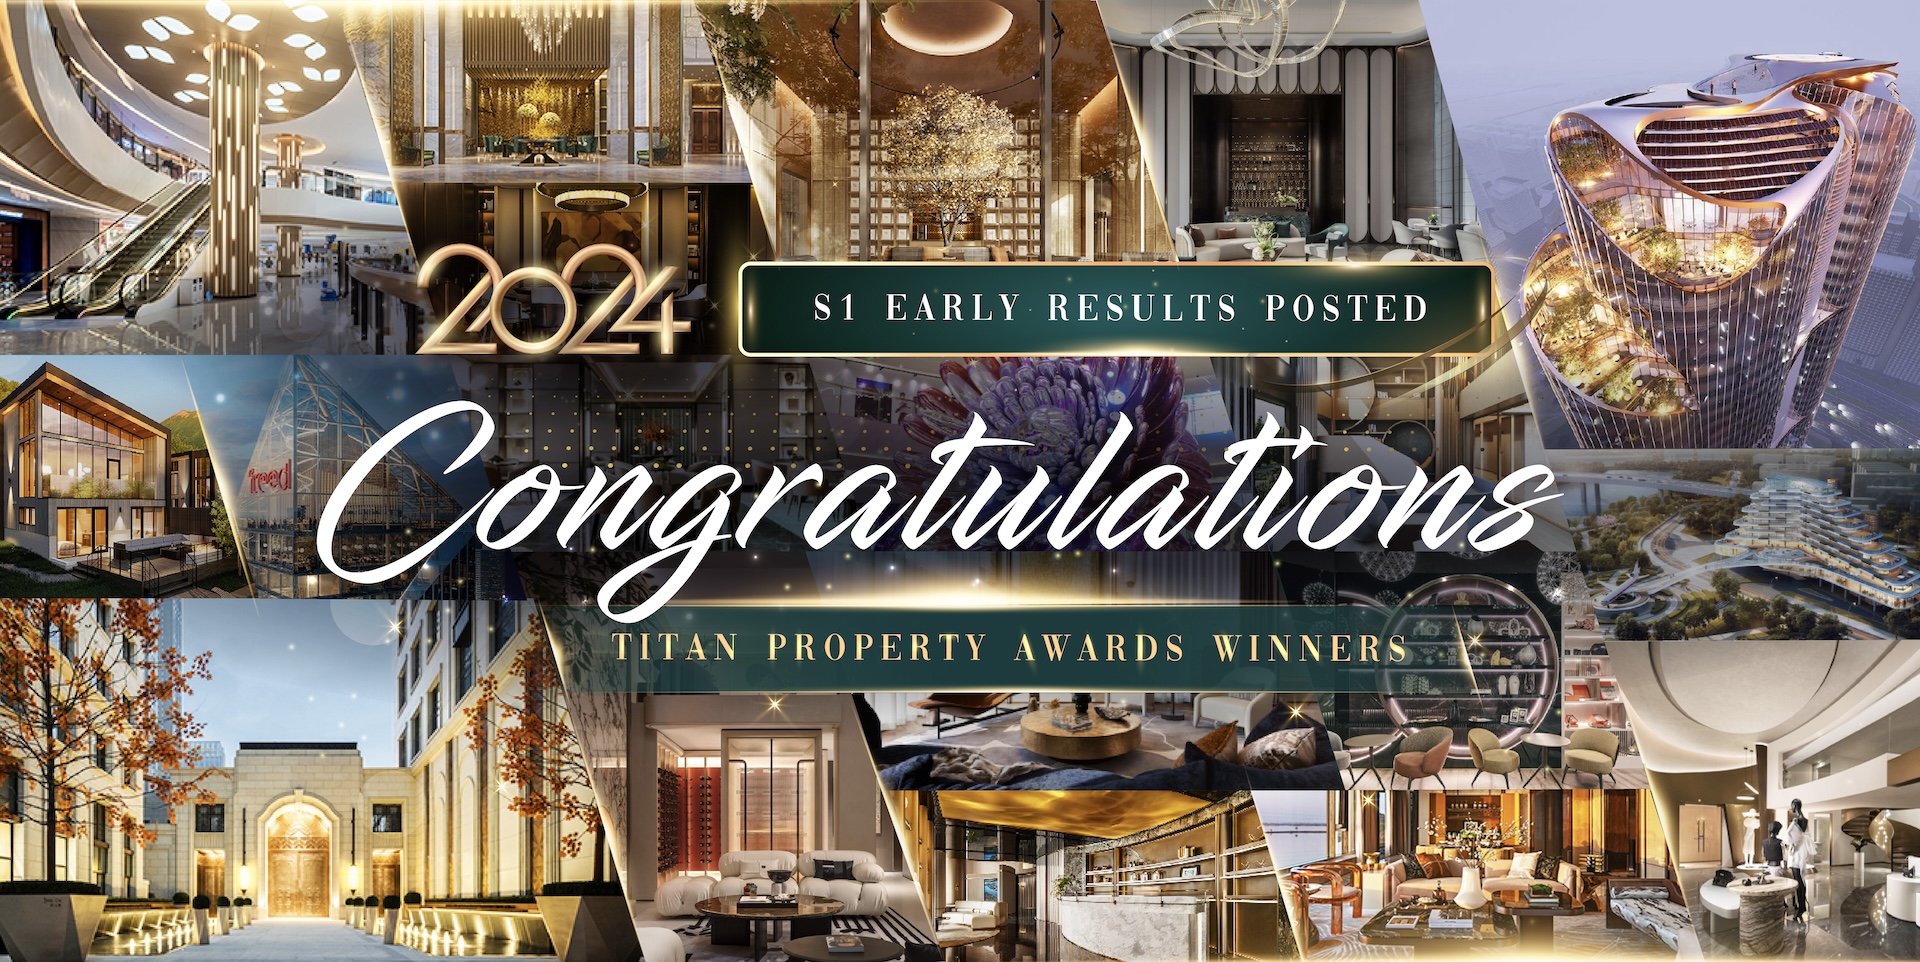 The Early Winners of the 2024 TITAN Property Awards have been announced! 